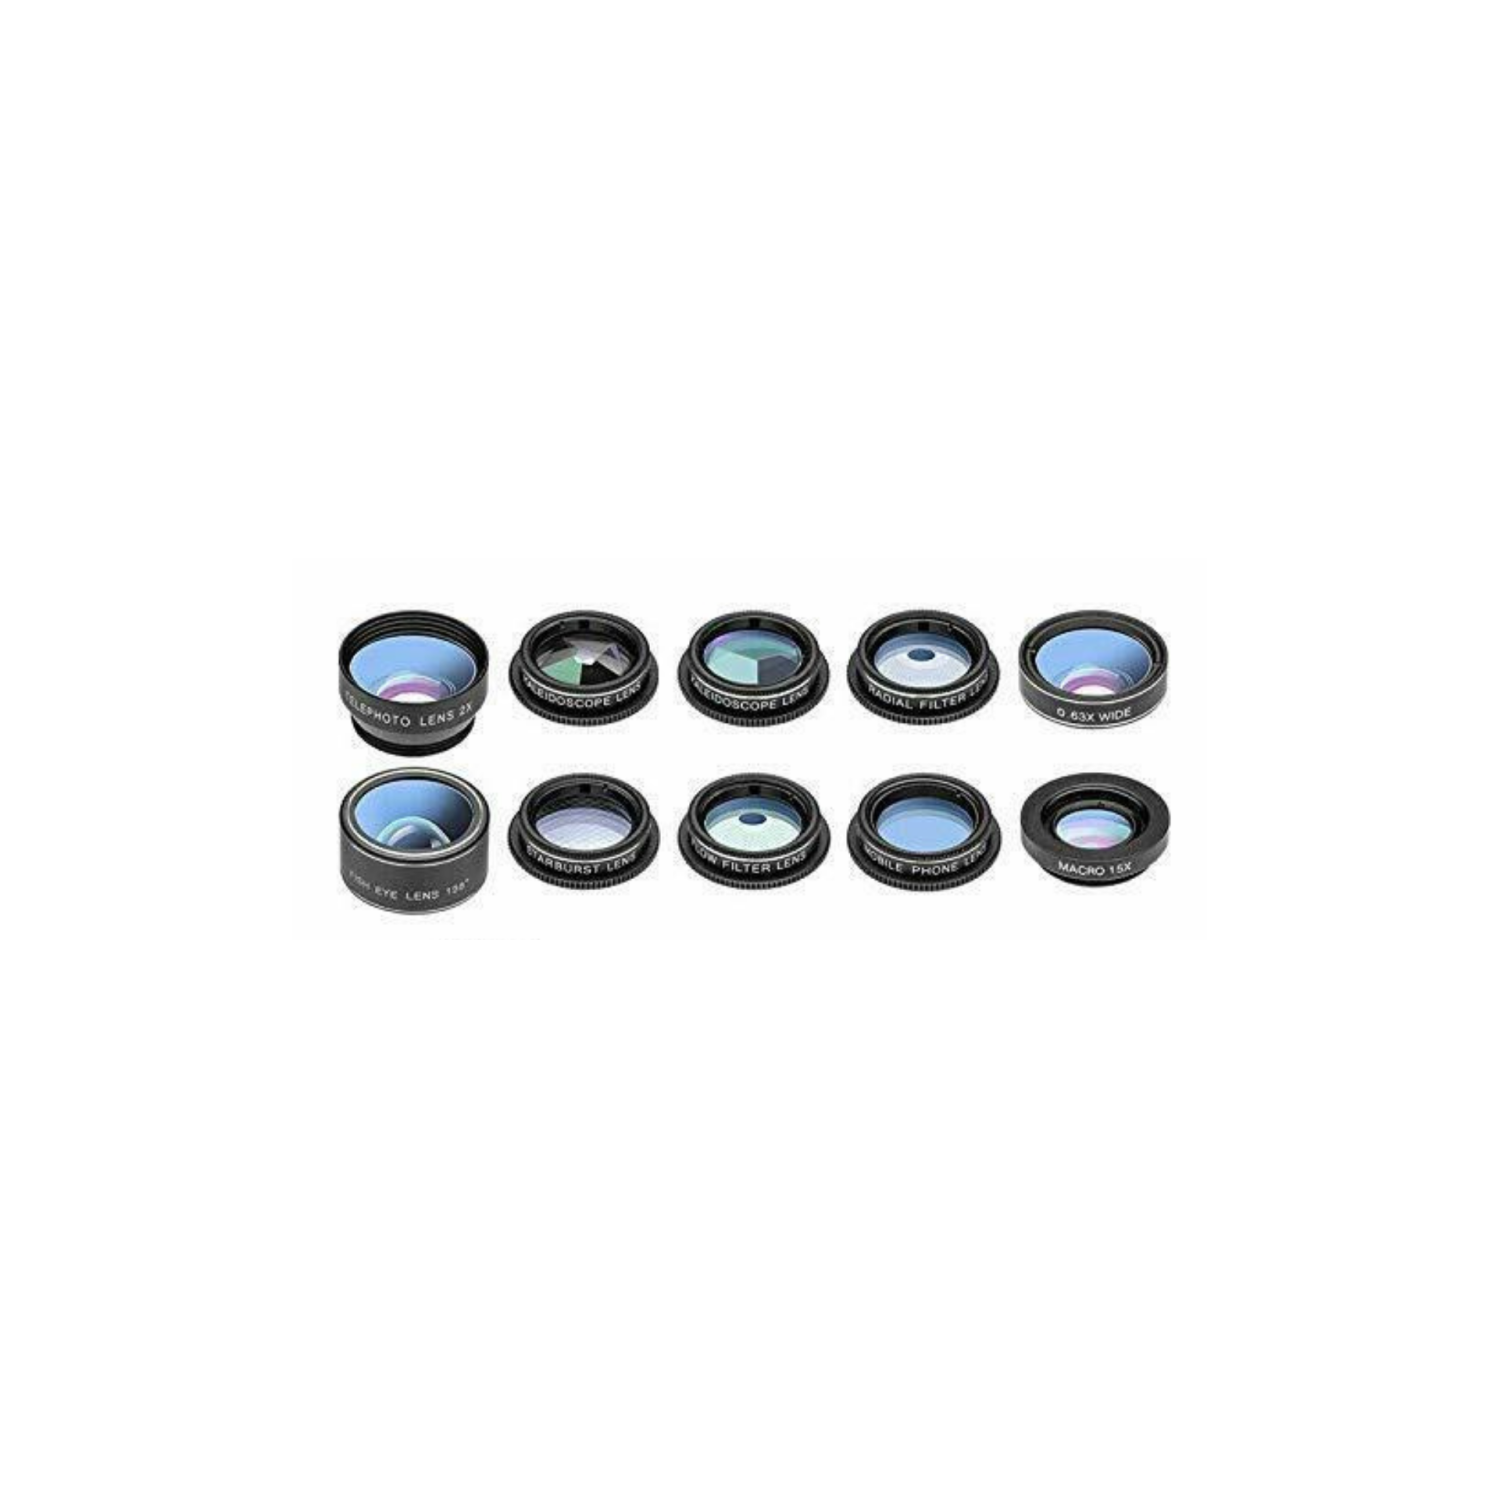 Phone Camera Lens 10 in 1 Cell Phone Lens Kit Macro Lens for iPhone and Android